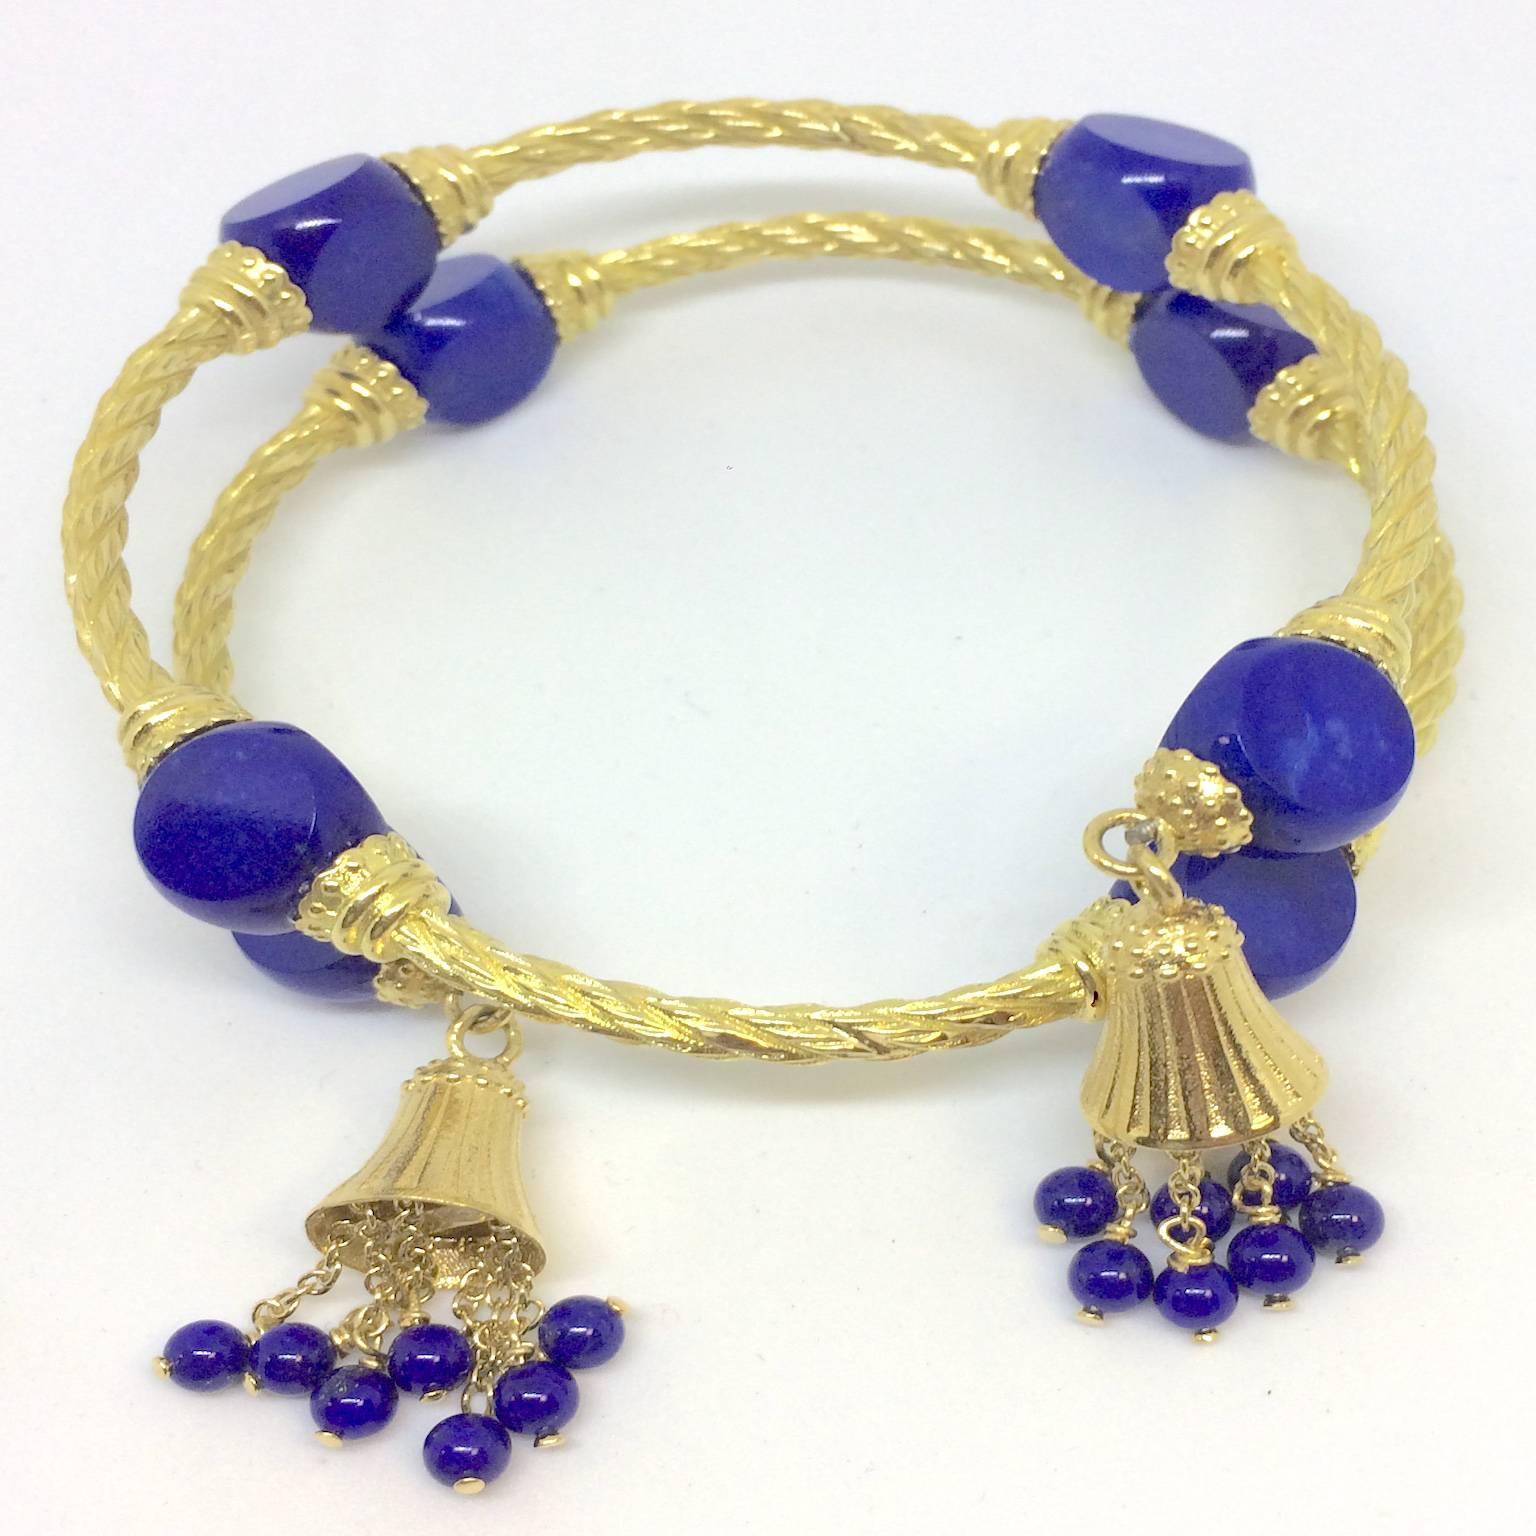 CARLO WEINGRILL retro bracelet in yellow gold and lapis-lazuli triangular shape with steel spring inside.